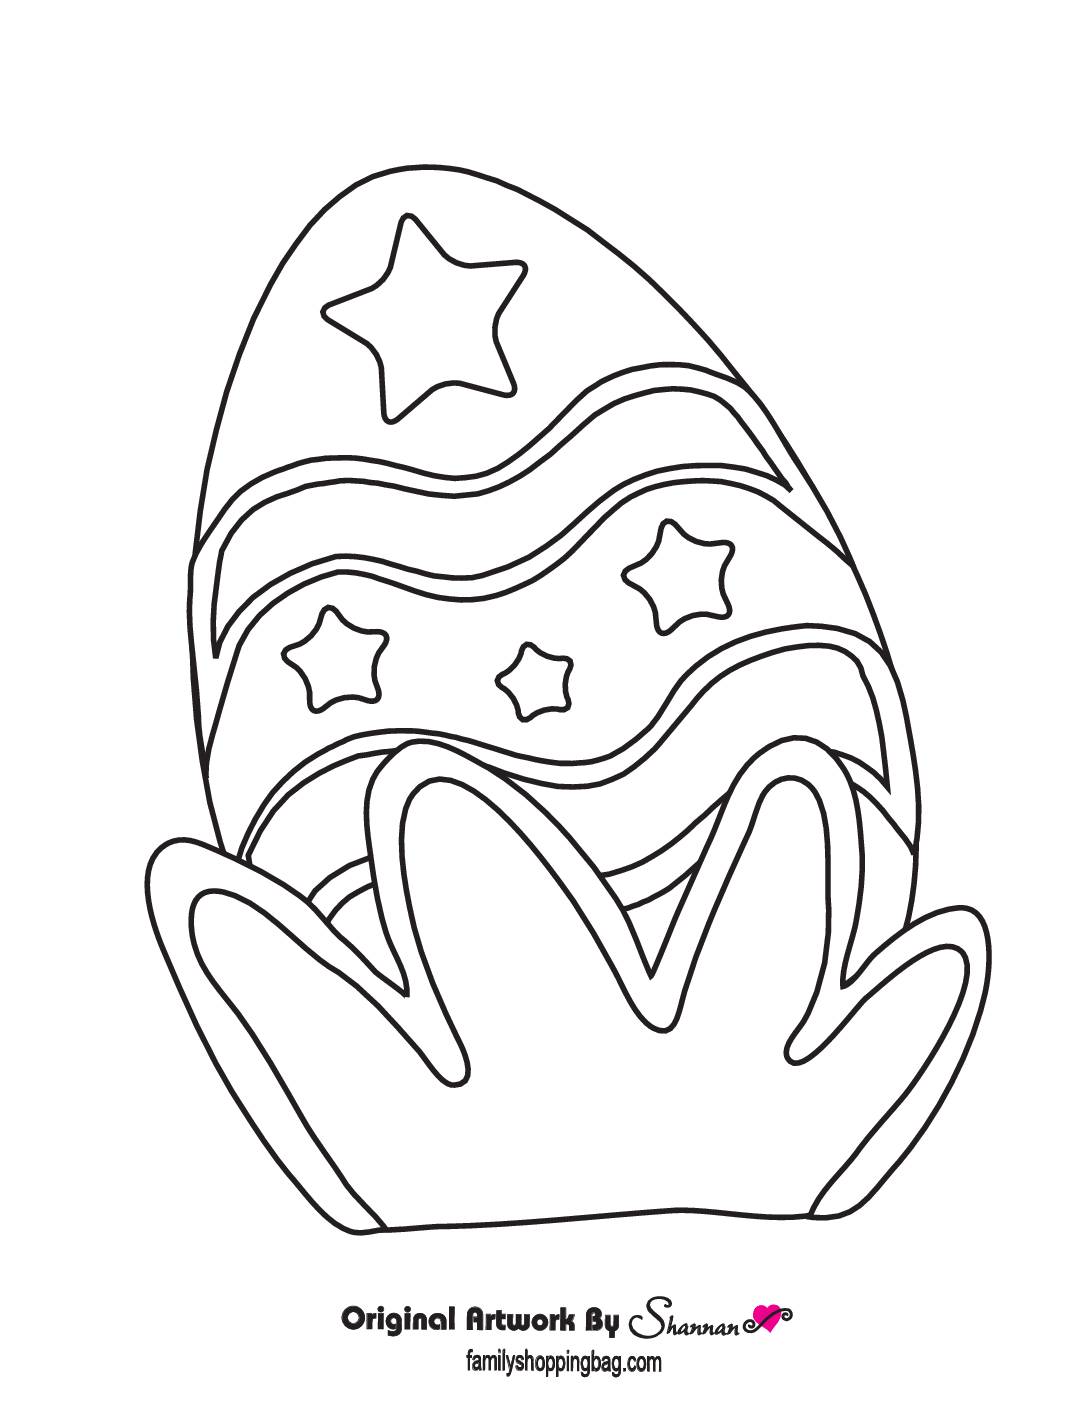 Coloring Page 4 Coloring Pages